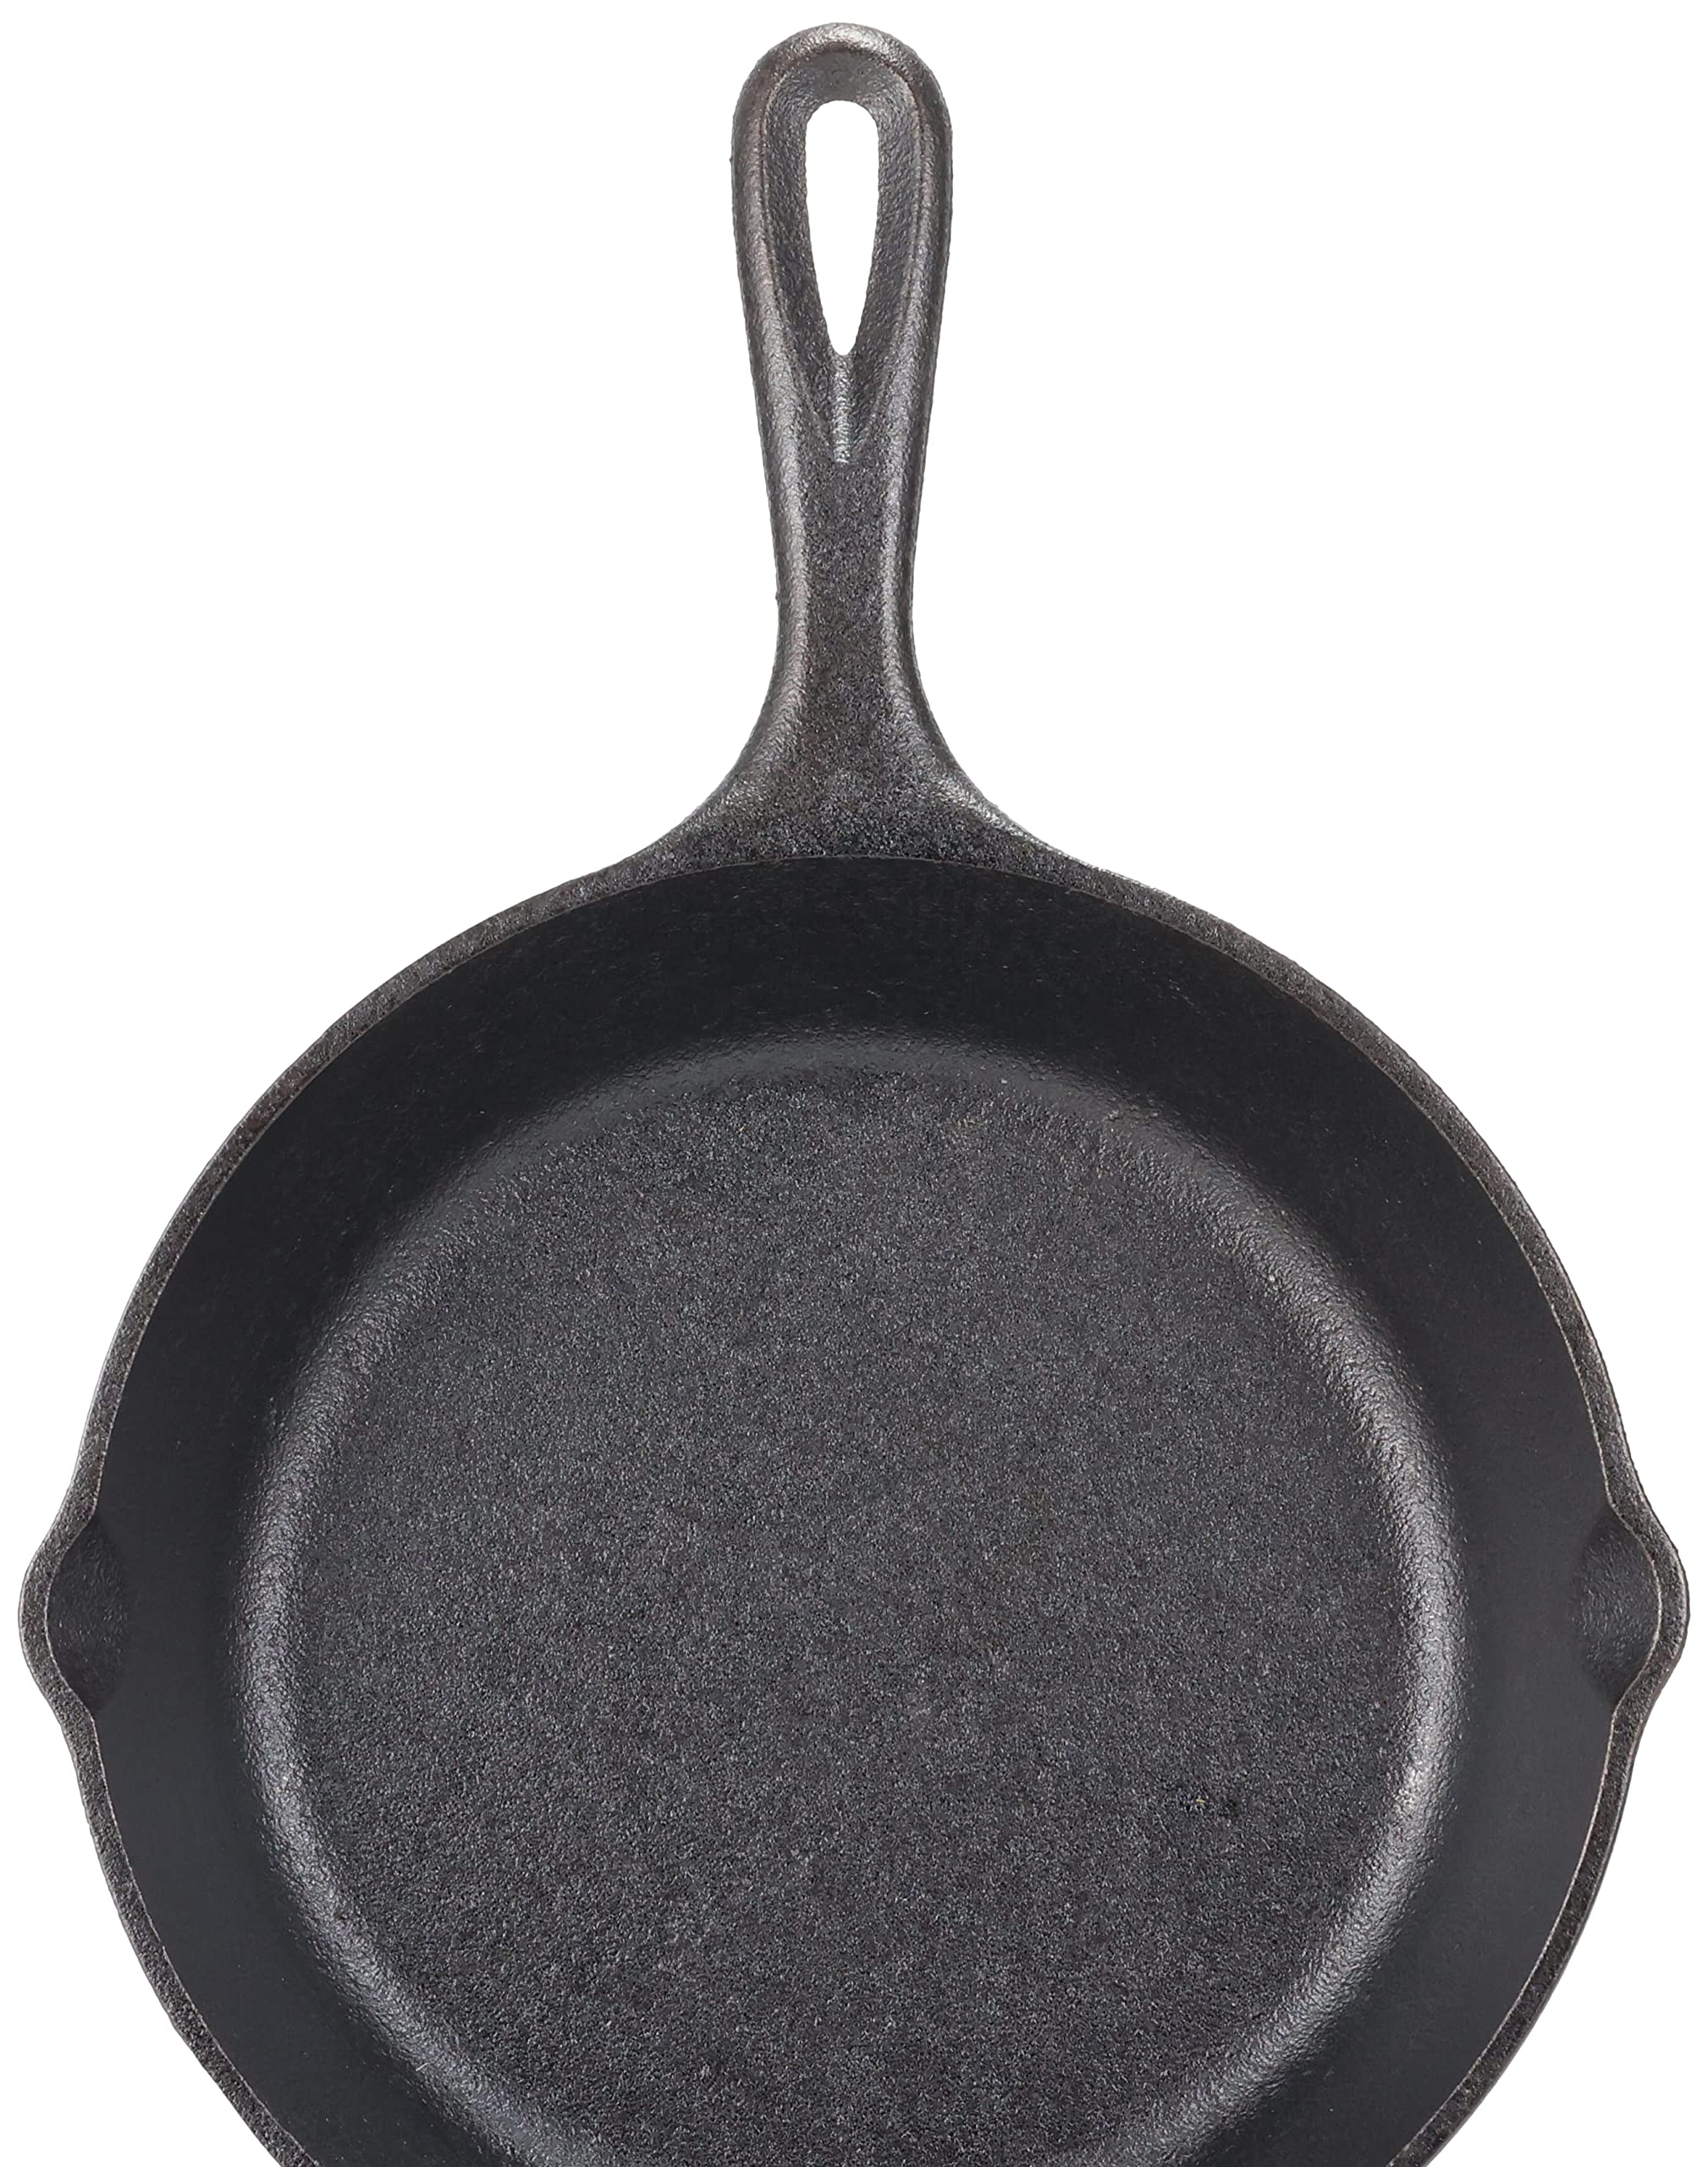 Lodge 10.25 Inch Cast Iron Pre-Seasoned Skillet – Signature Teardrop Handle - Use in the Oven, on the Stove, on the Grill, or Over a Campfire, Black